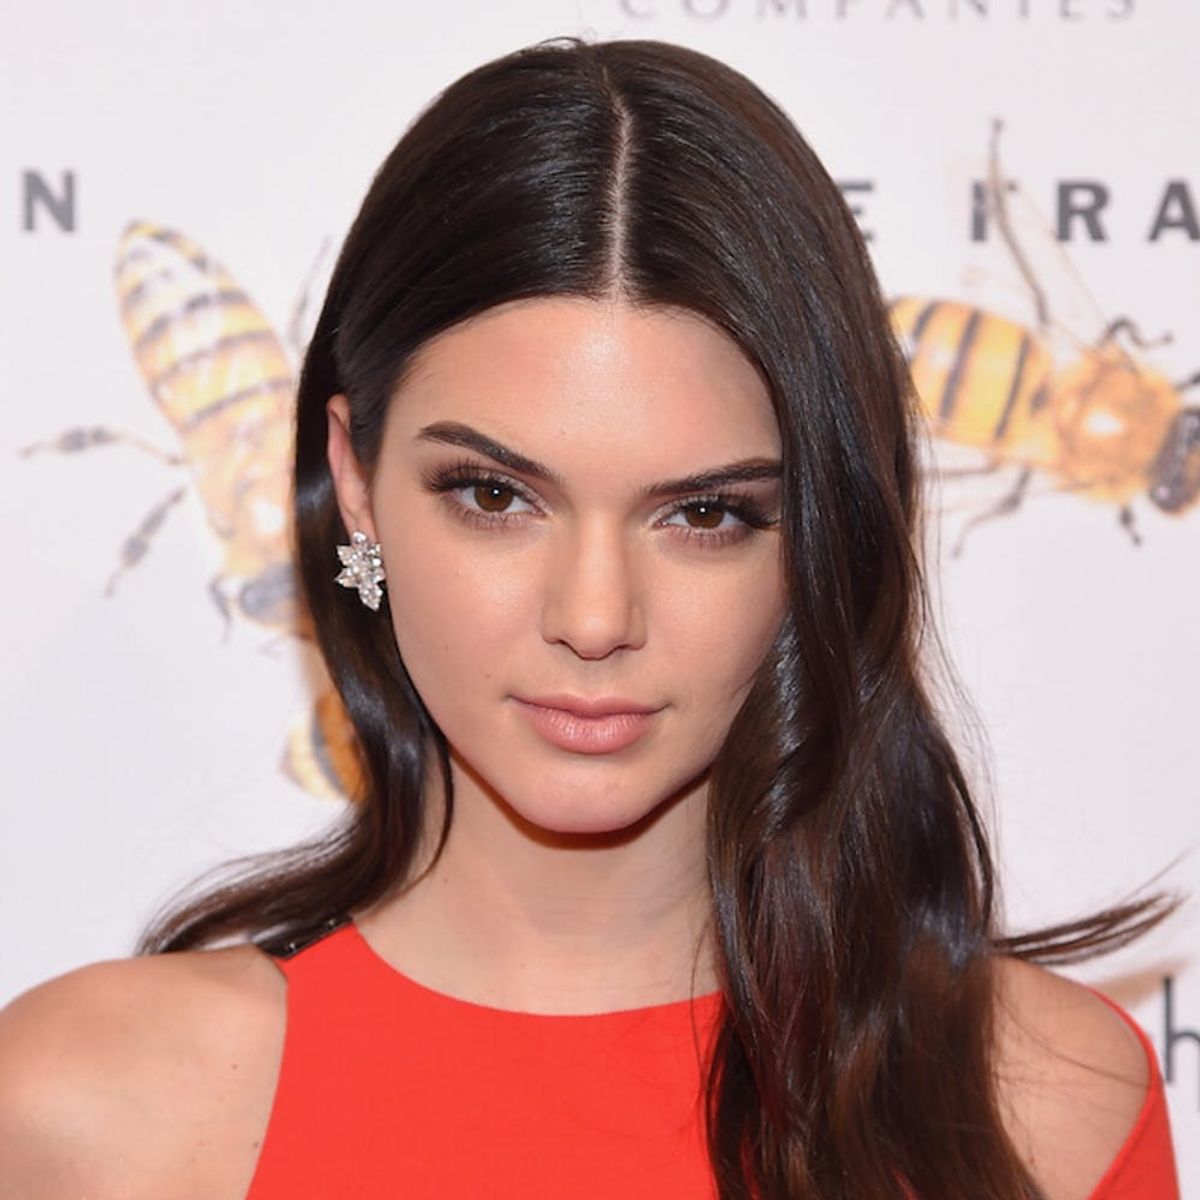 See the Kendall Jenner Pic That Just Got the Most Likes on Instagram *Ever*